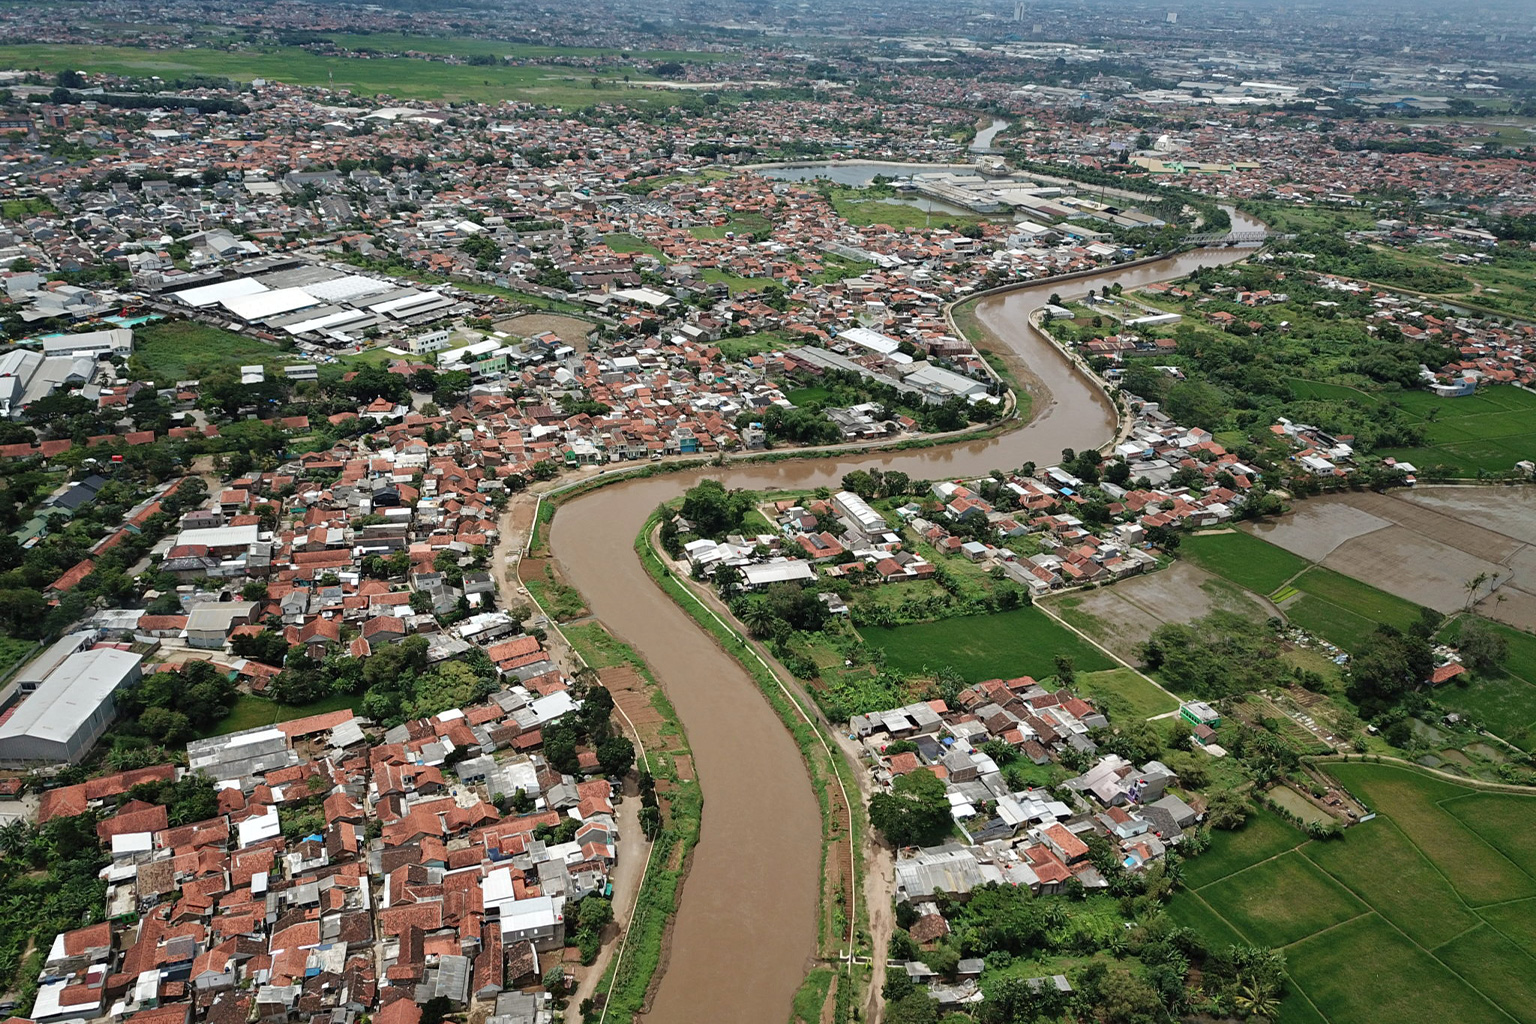 The Citarum flows through a densely populated area in Bandung.